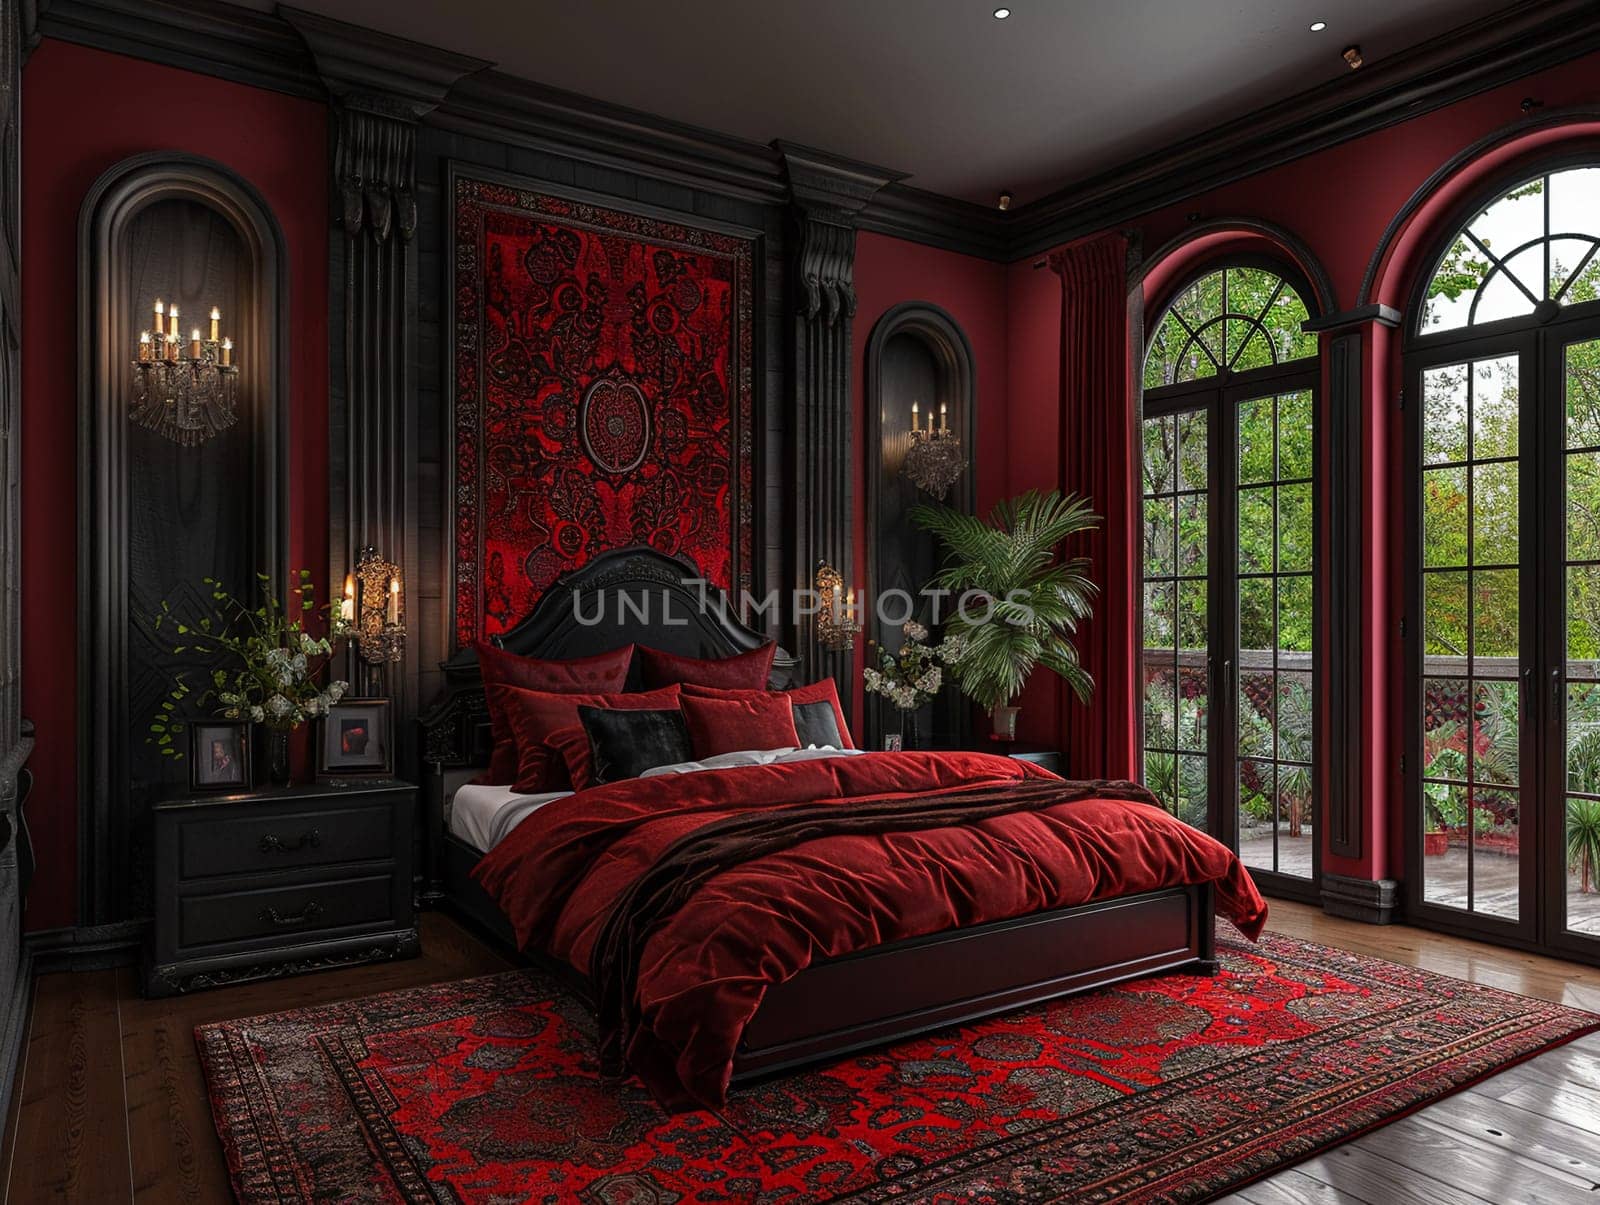 Modern Gothic bedroom with dark colors and dramatic decor by Benzoix